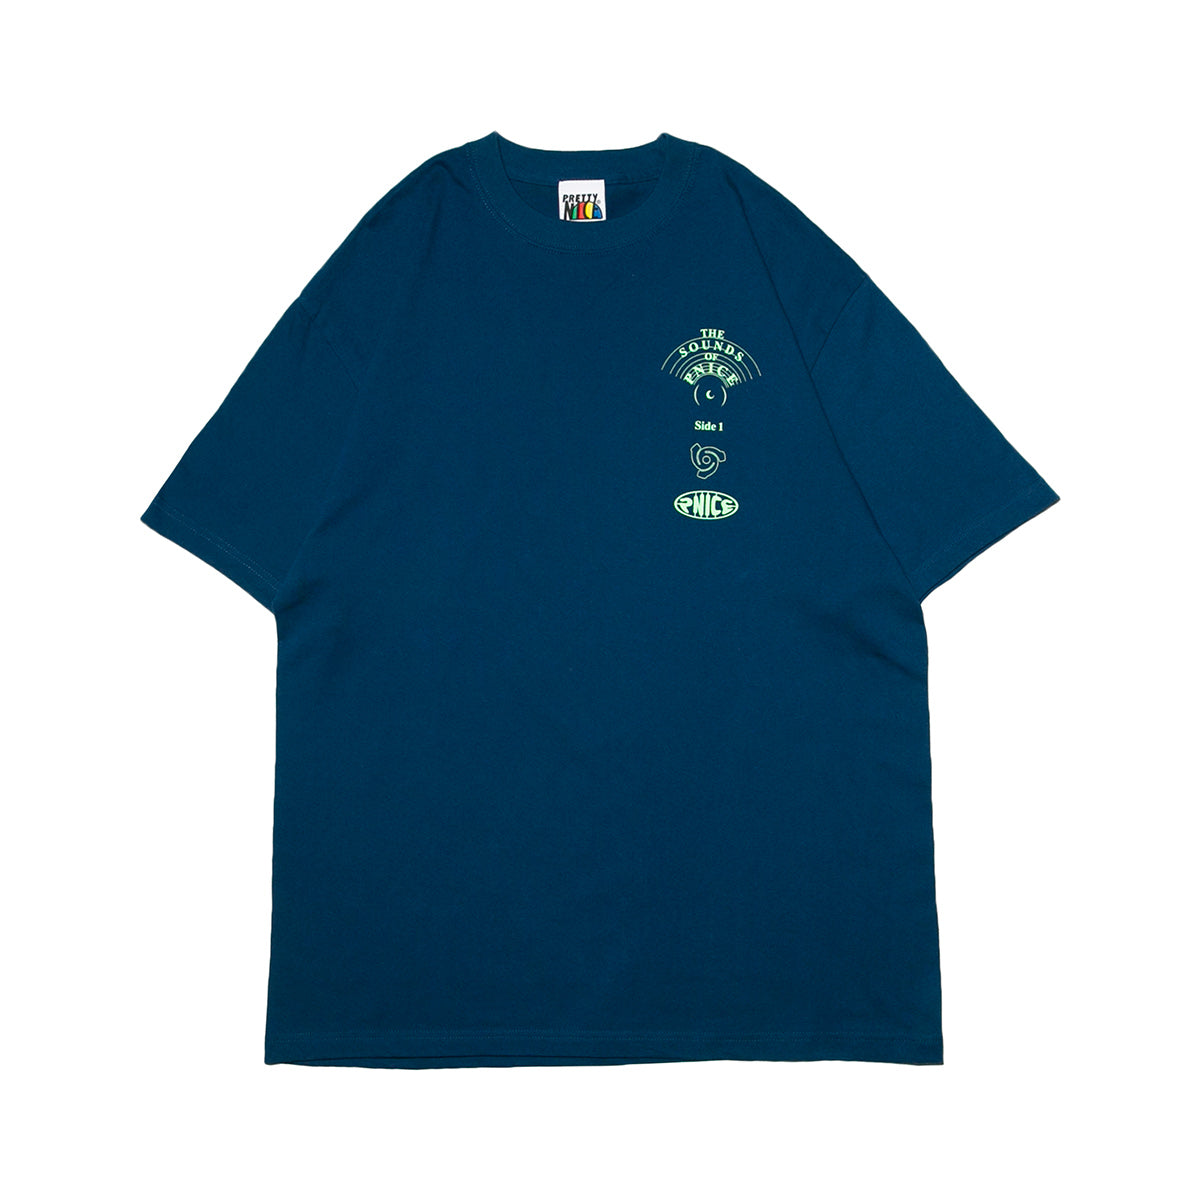 Voyager Golden Record Tee-Classic Blue